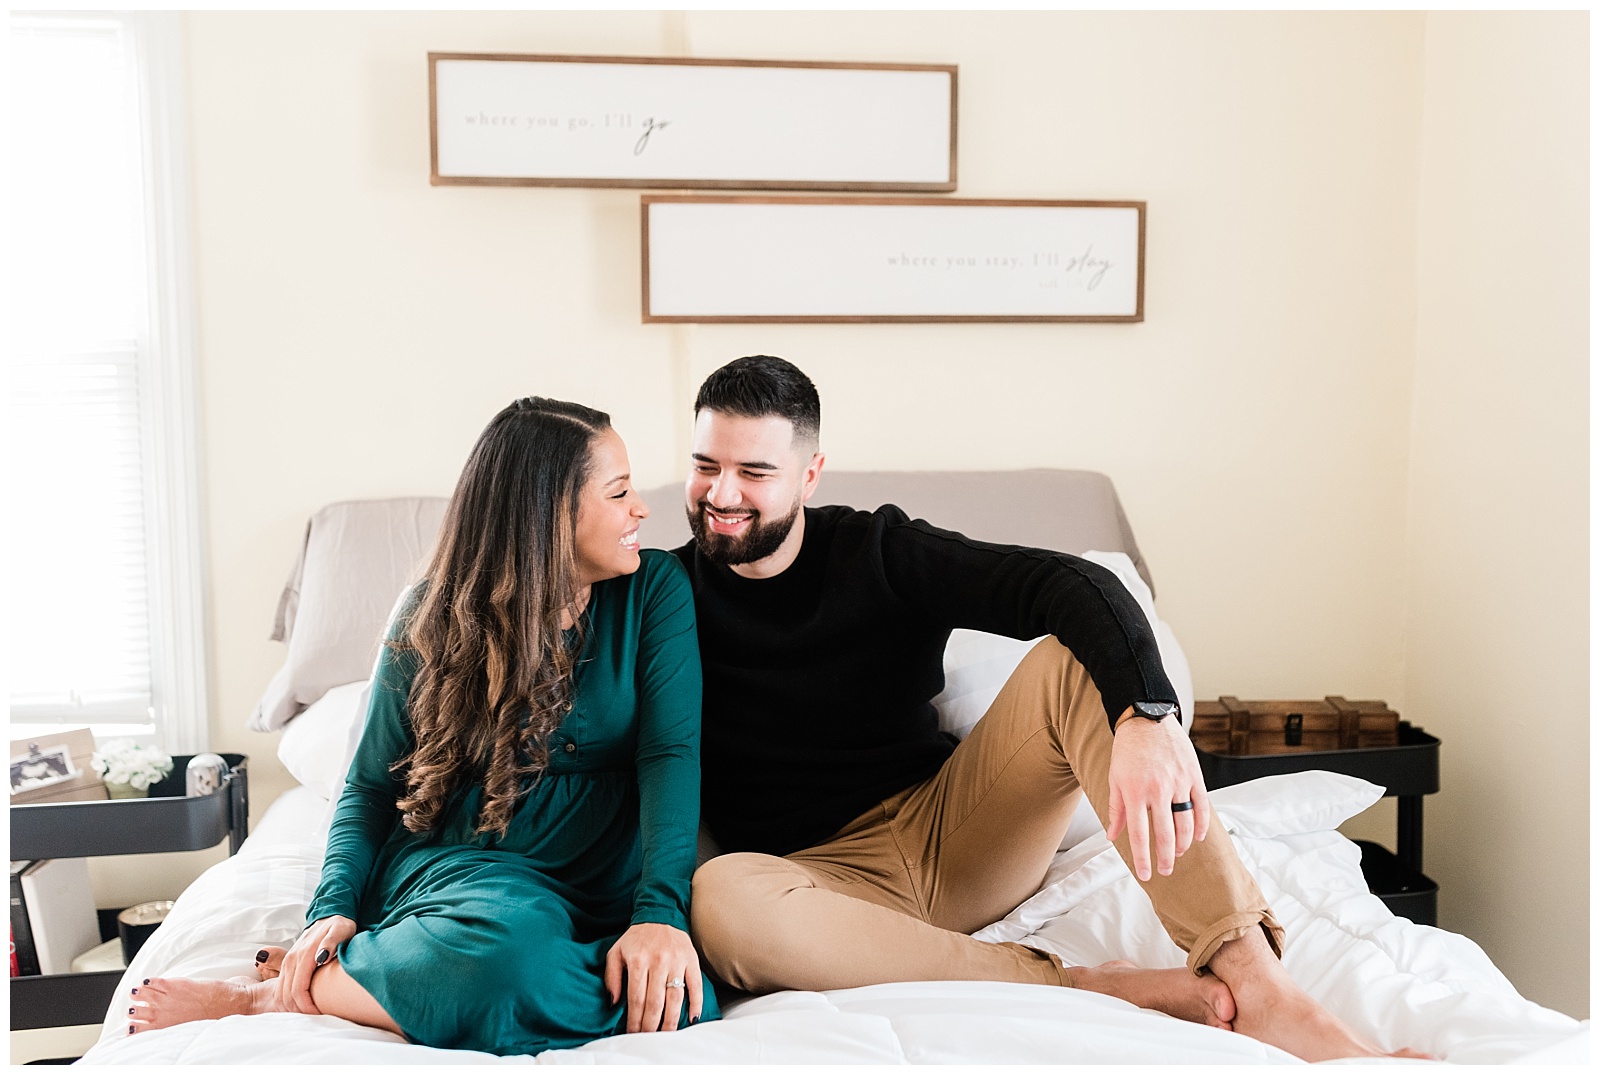 In Home Maternity Session, Nursery, Baby, New Parents, Maternity Shoot, Pregnant, Pregnancy Photos, New Jersey, Photographer, Baby Boy, Bed, Bedroom, Cozy,, Photo